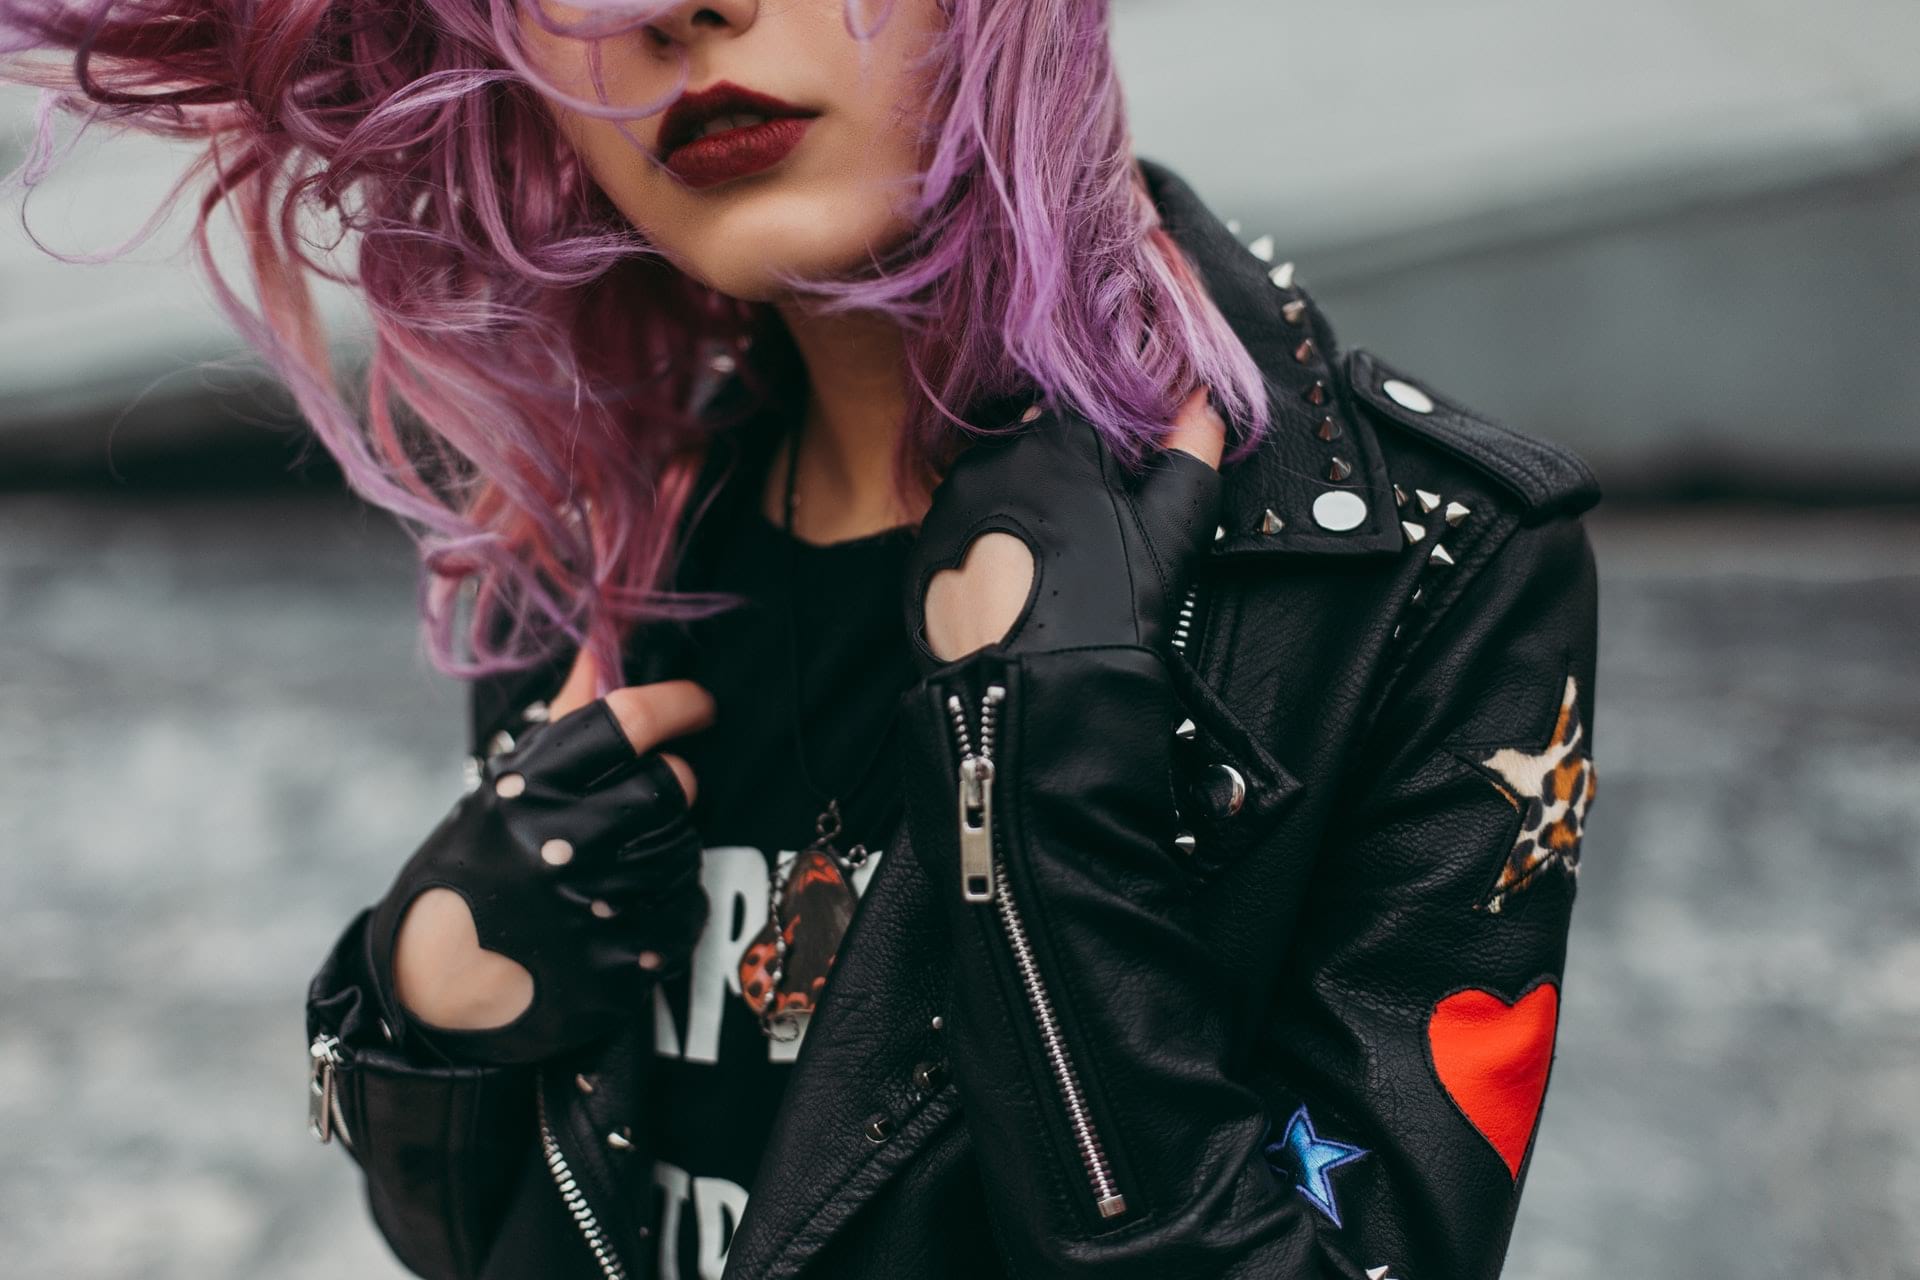 violet haired woman in a leather jacket